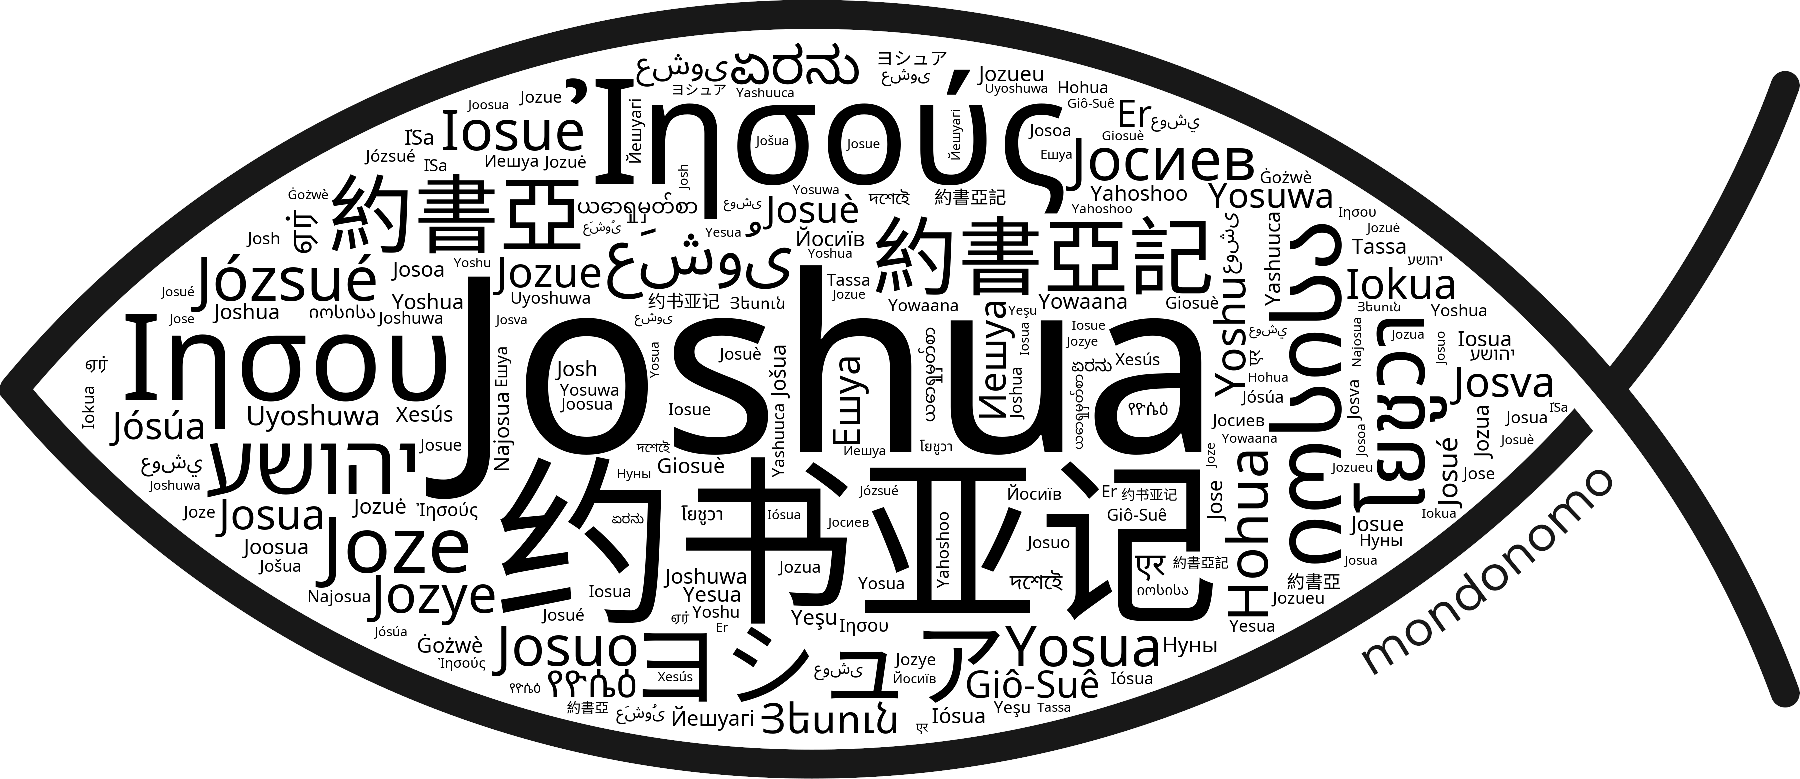 Name Joshua in the world's Bibles